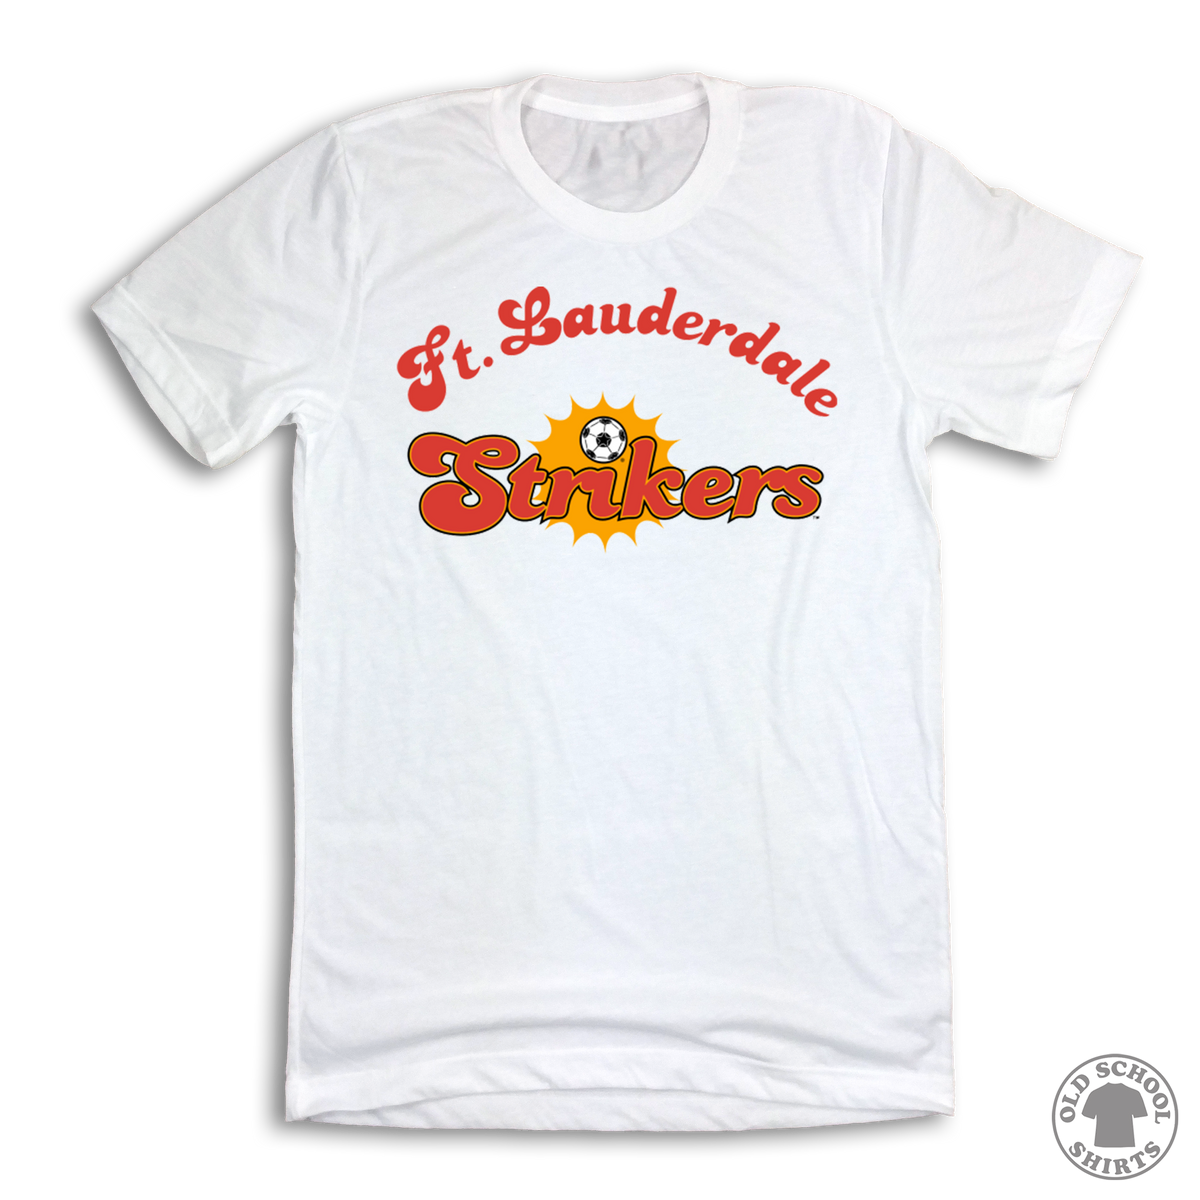 Ft. Lauderdale Strikers - Old School Shirts- Retro Sports T Shirts